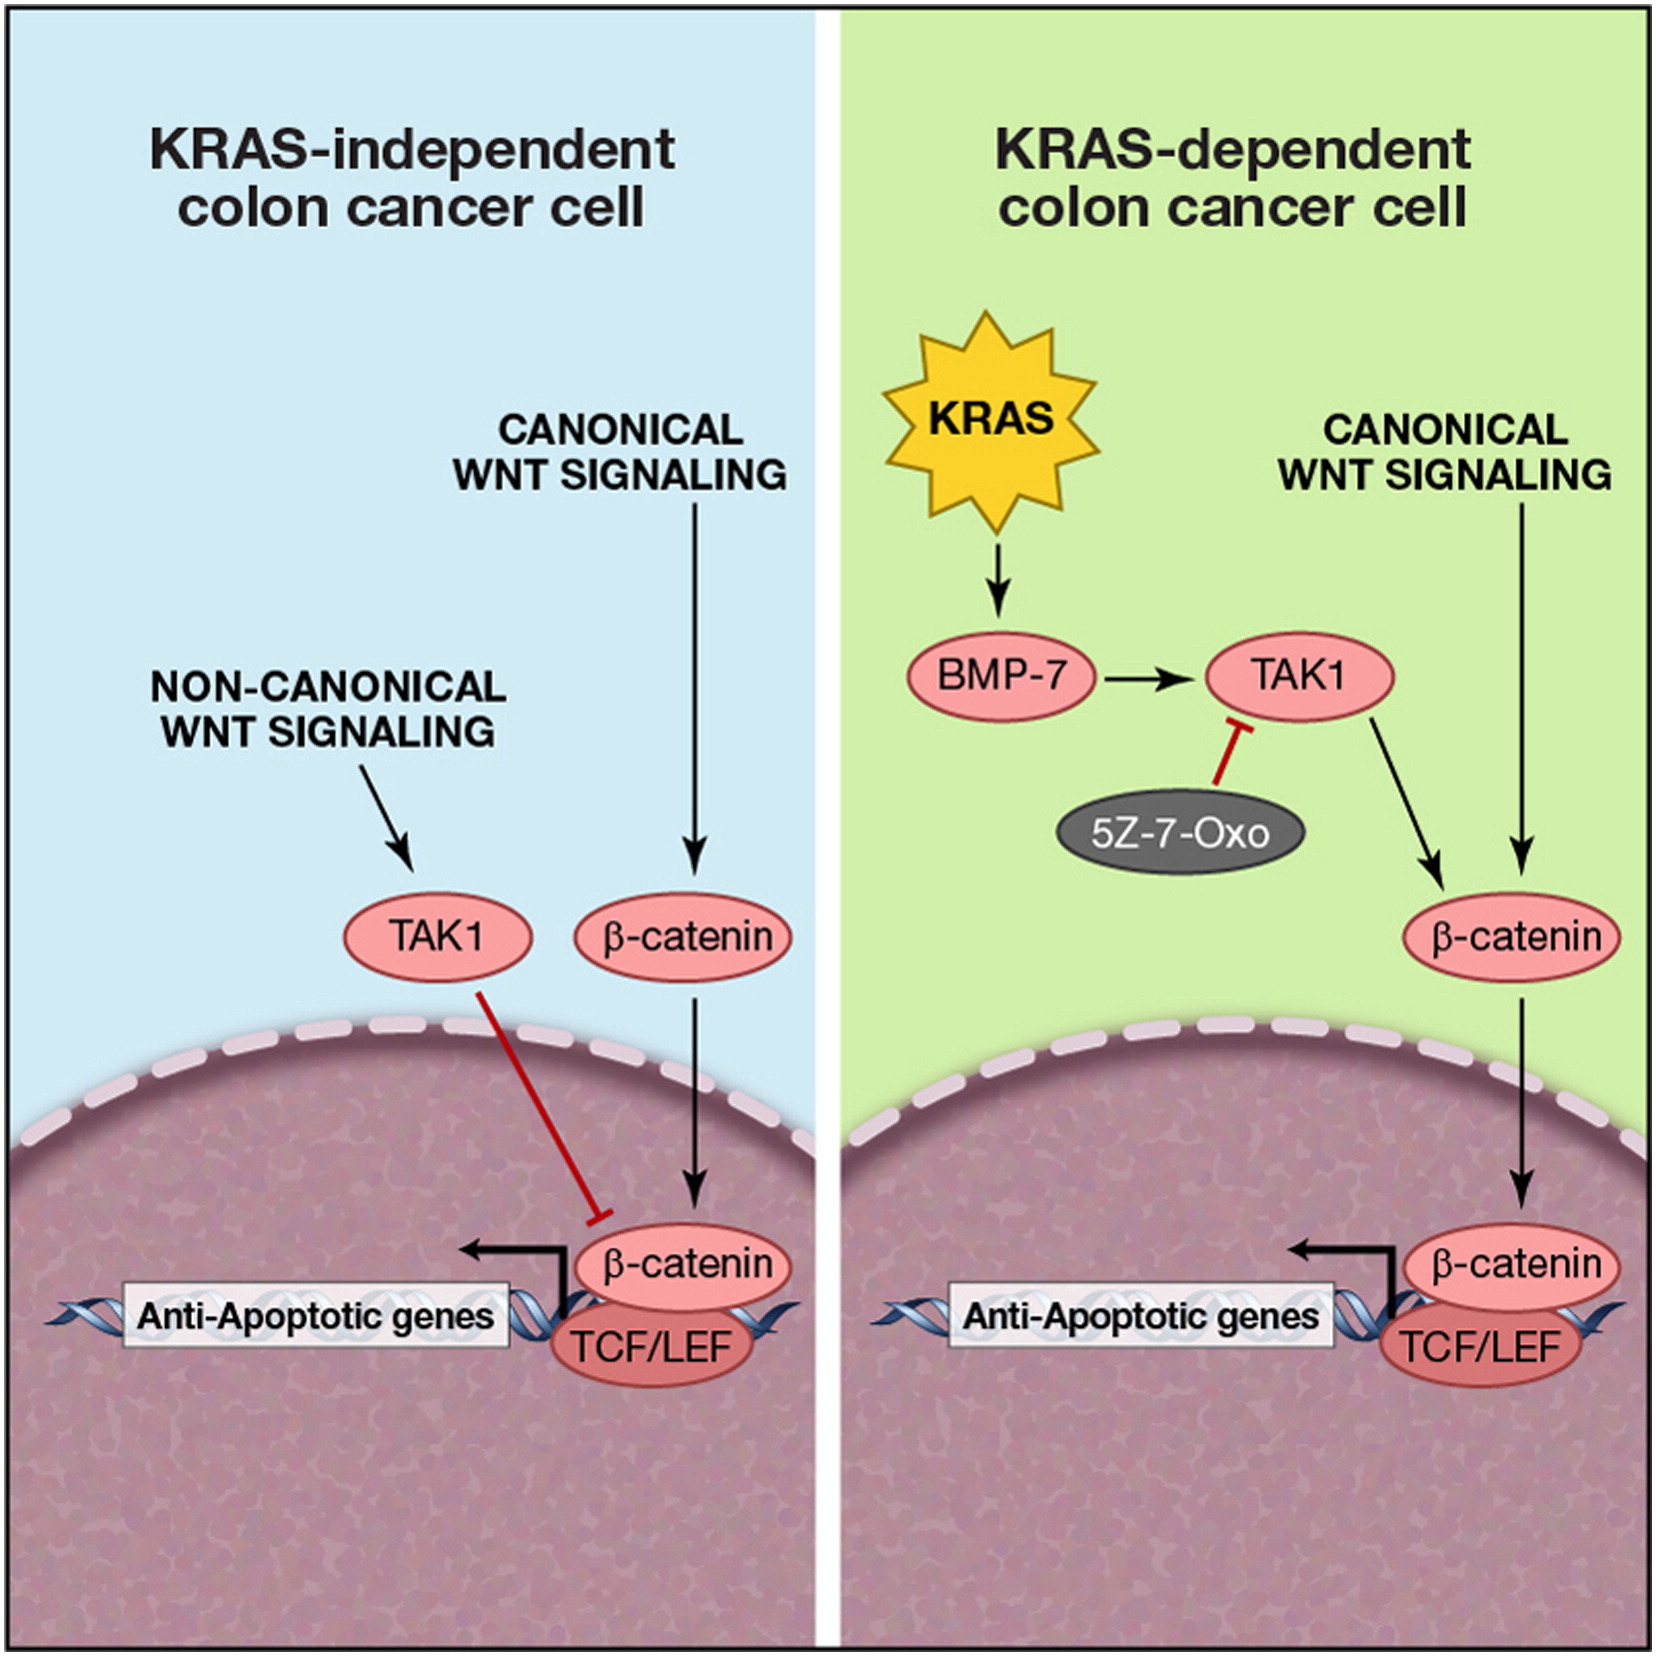 TAK1 Inhibition Promotes Apoptosis in KRAS-Dependent Colon Cancers: Cell